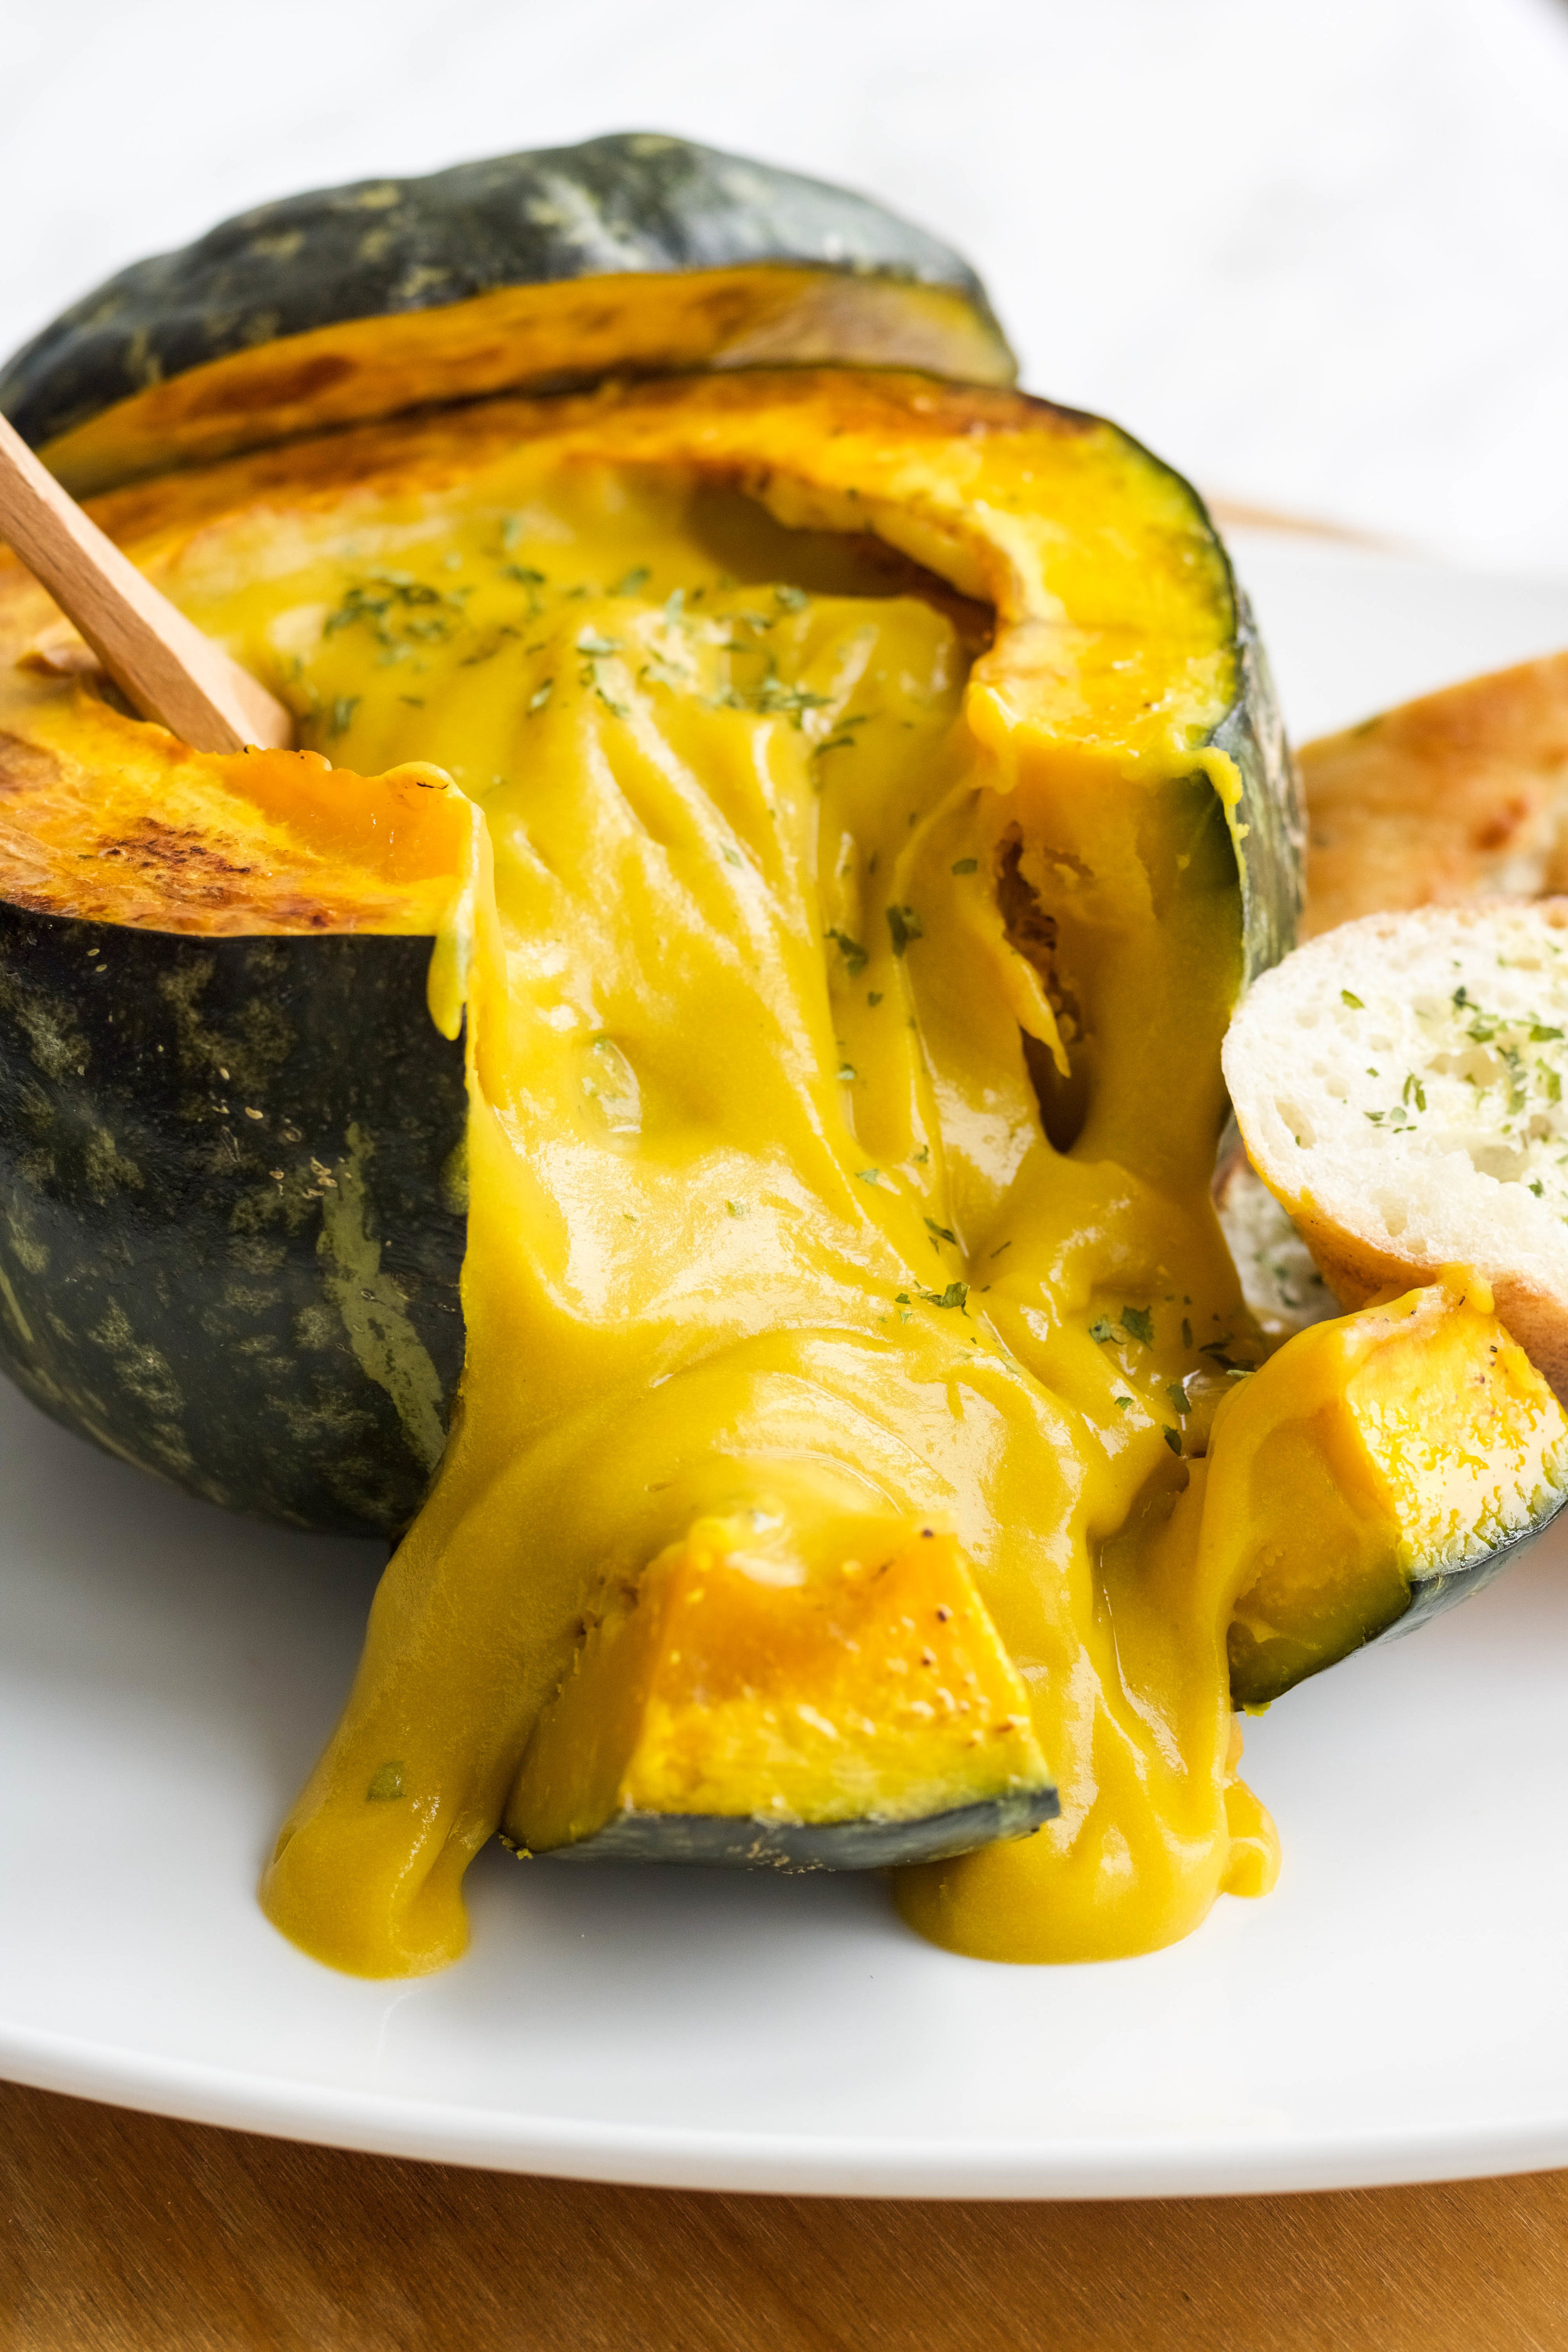  Ingredients:  1 small onion  1 med potato (around 150g)  1/2 carrot (approx 40g)  1.5 lbs kabocha squash*  2 c + 1/4c veg stock  1 c soy milk**  Optional: Additional squashed to make kabocha bowls  Method:  1. If making kabocha bowls, pre-heat oven to 350  2. Cut upper half of the squash and discard the seeds  3. Place on a baking tray and place in oven for 30 minutes  4. Chop up the onion, carrot, potato and kabocha into small pieces  5. Sautee the onions lightly  6. Add in the carrots, potatoes and kabocha and let it sautee for a few minutes  7. Add in the veggie broth and let it come to a boil and then reduce to a simmer for approx 40 minutes or until you can mash the potatoes and kabocha with a fork  8. Remove from heat and let it cool  9. Once slightly cooled, transfer to a blender and add soy milk  10. Pour it into the kabocha bowls and serve with toasted garlic baguettes!      Notes:  1. Buttercup squash may be substituted   2. Add more for a thinner consistency! 